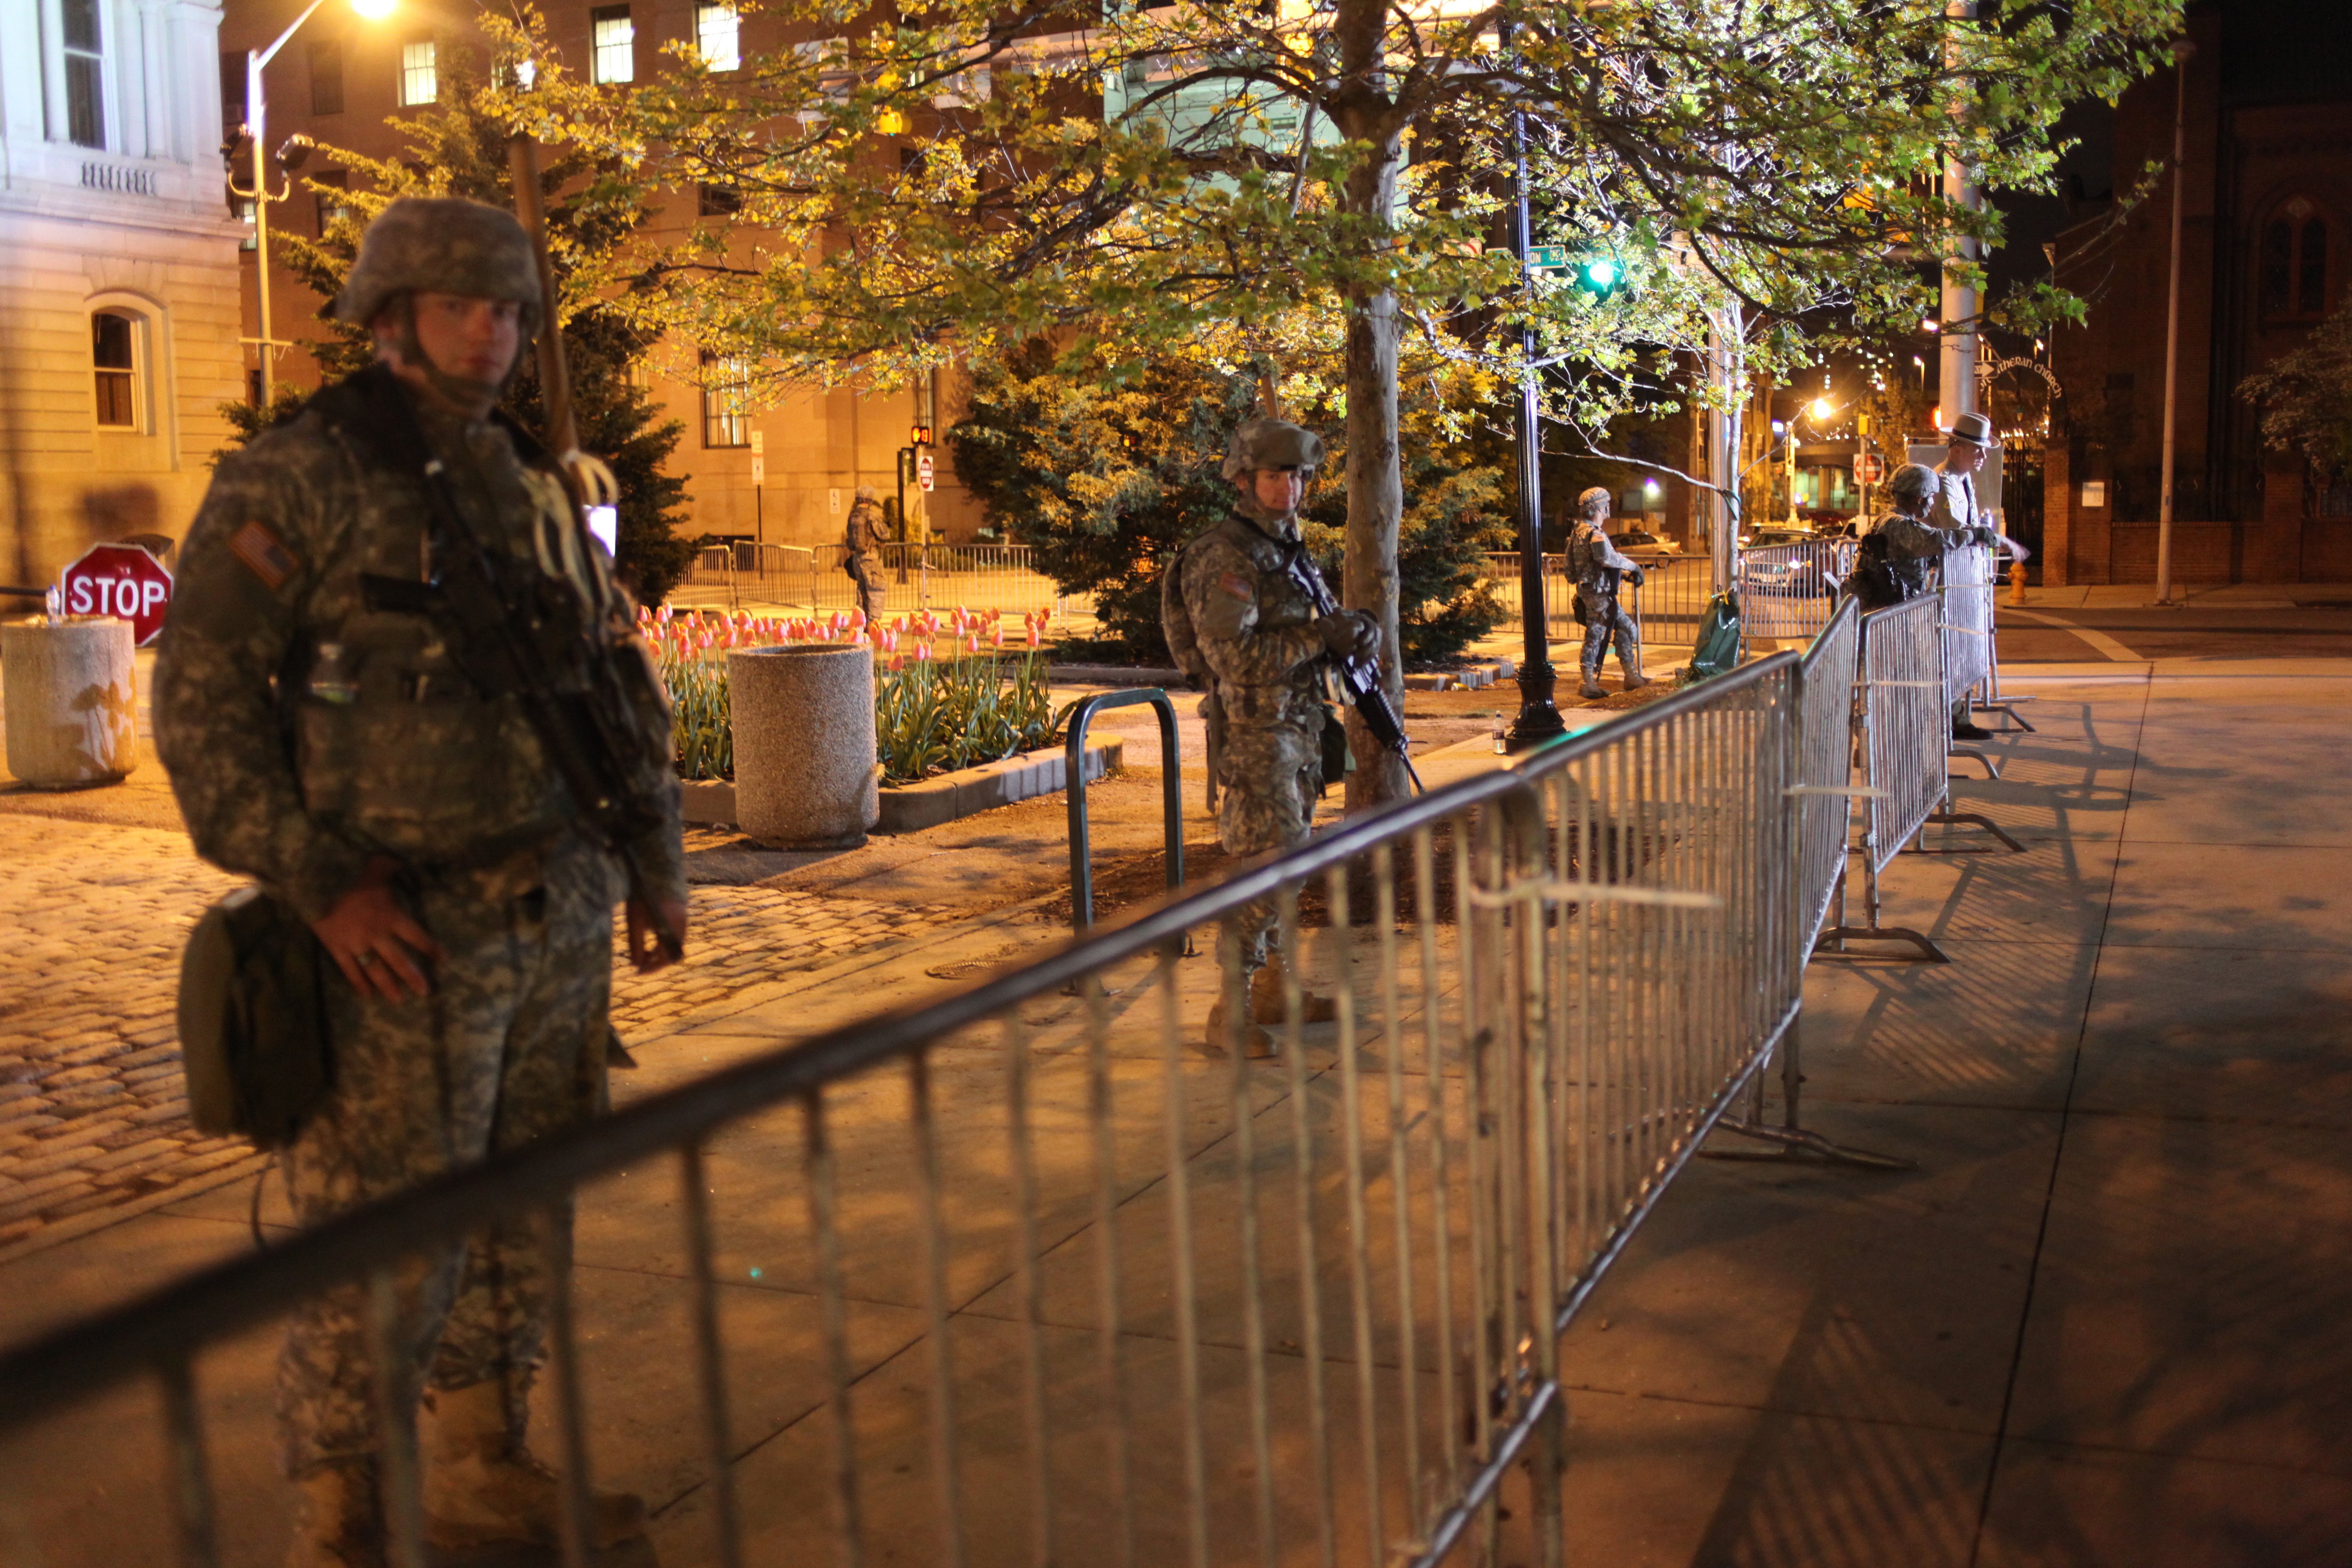 Maryland Army National Guard soldiers line a barricade in front of Baltimore City Hall on April 30, 2015. (Jennifer-Leigh Oprihory/MEDILL NSJI)